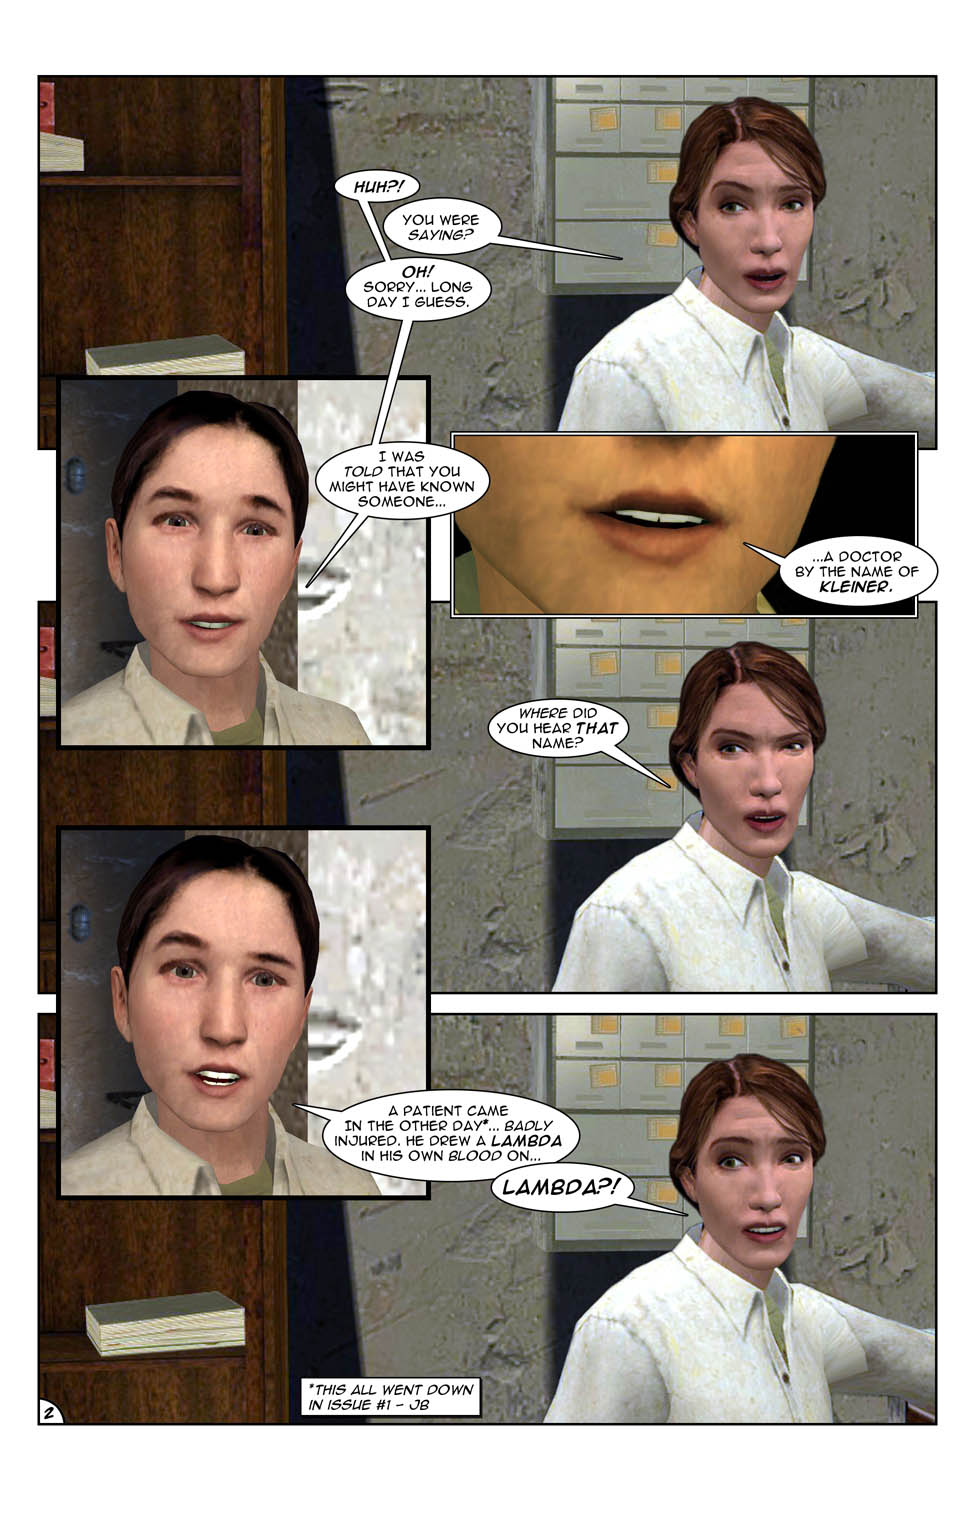 Galena Noland wakes up from her daydream. She's talking to Doctor Judith Mossman. Galena asks about a man by the name of Kleiner. Doctor Mossman reacts with suspicion, asking where she heard the name, and Galena explains that a patient came in the other day, badly injured, and drew a lambda in his own blood. Doctor Mossman cuts her off in shock as she hears the term lambda.